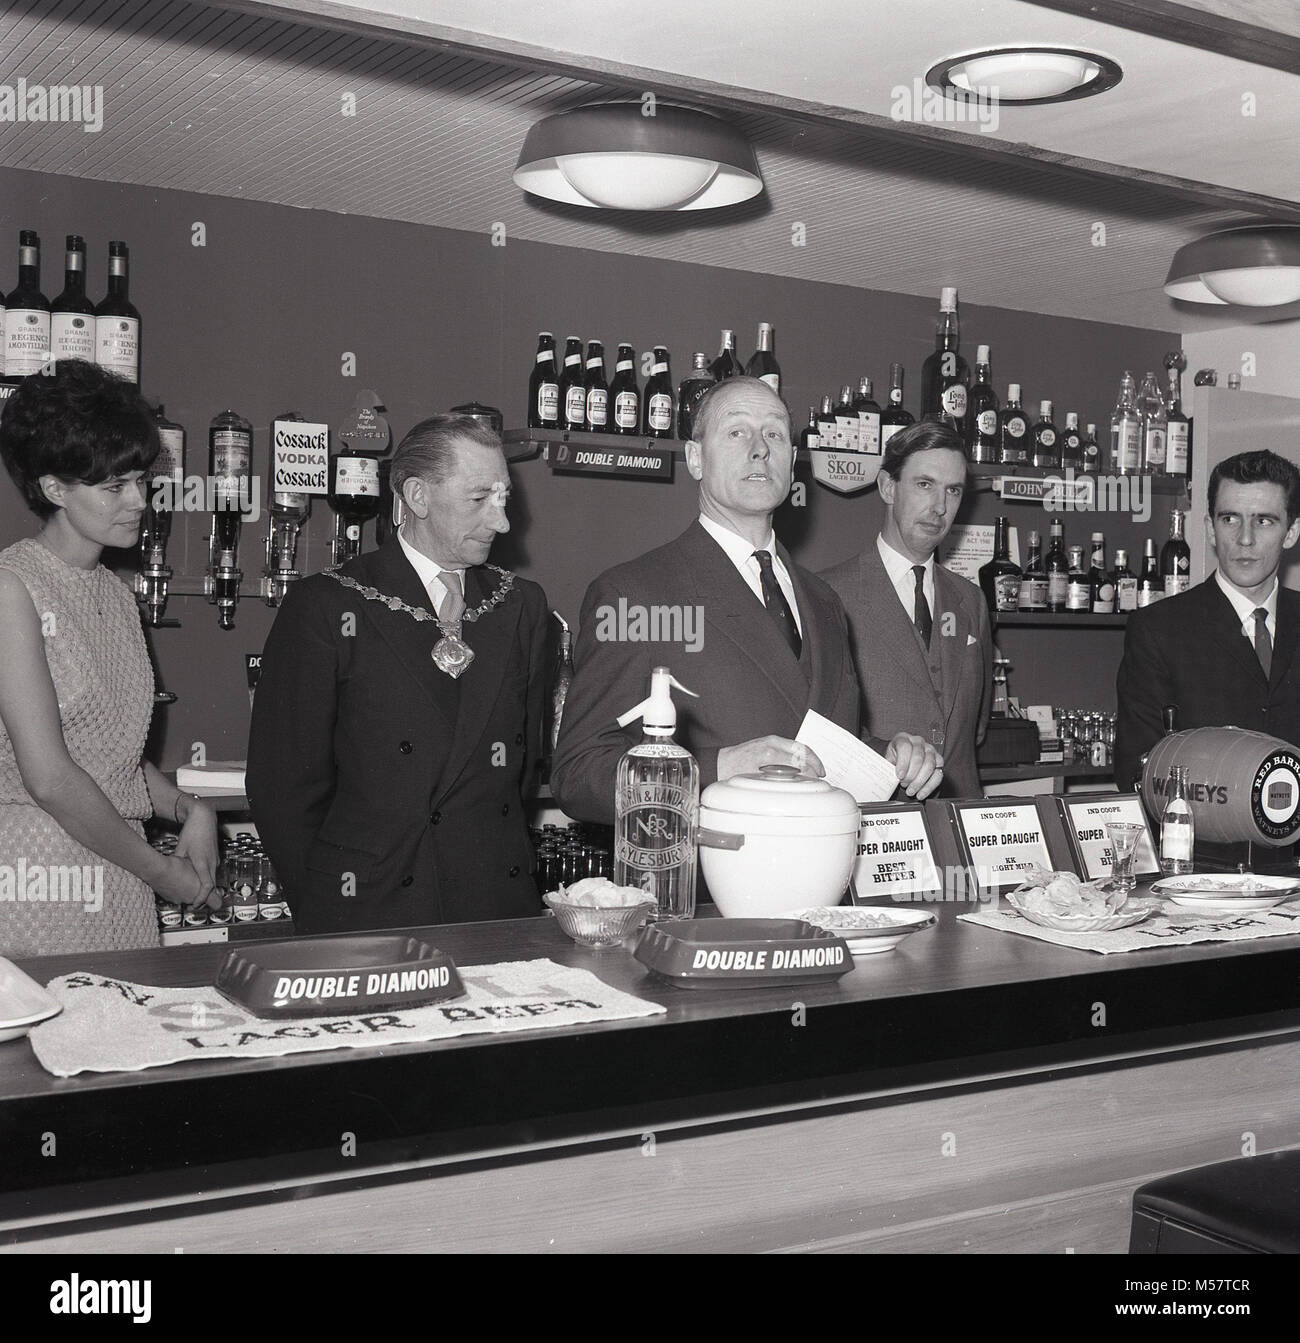 1965, historical picture showing the mayor and local dignitaries officially opening the community pub, The John Kennedy, named after the famous American President, JFK, at Meadowcroft housing estate in Aylesbury, Bucks, England, UK. In view, are all the great British beer brands of the era including 'Double Diamond', Skol and Watneys 'Red Barrel'. Stock Photo